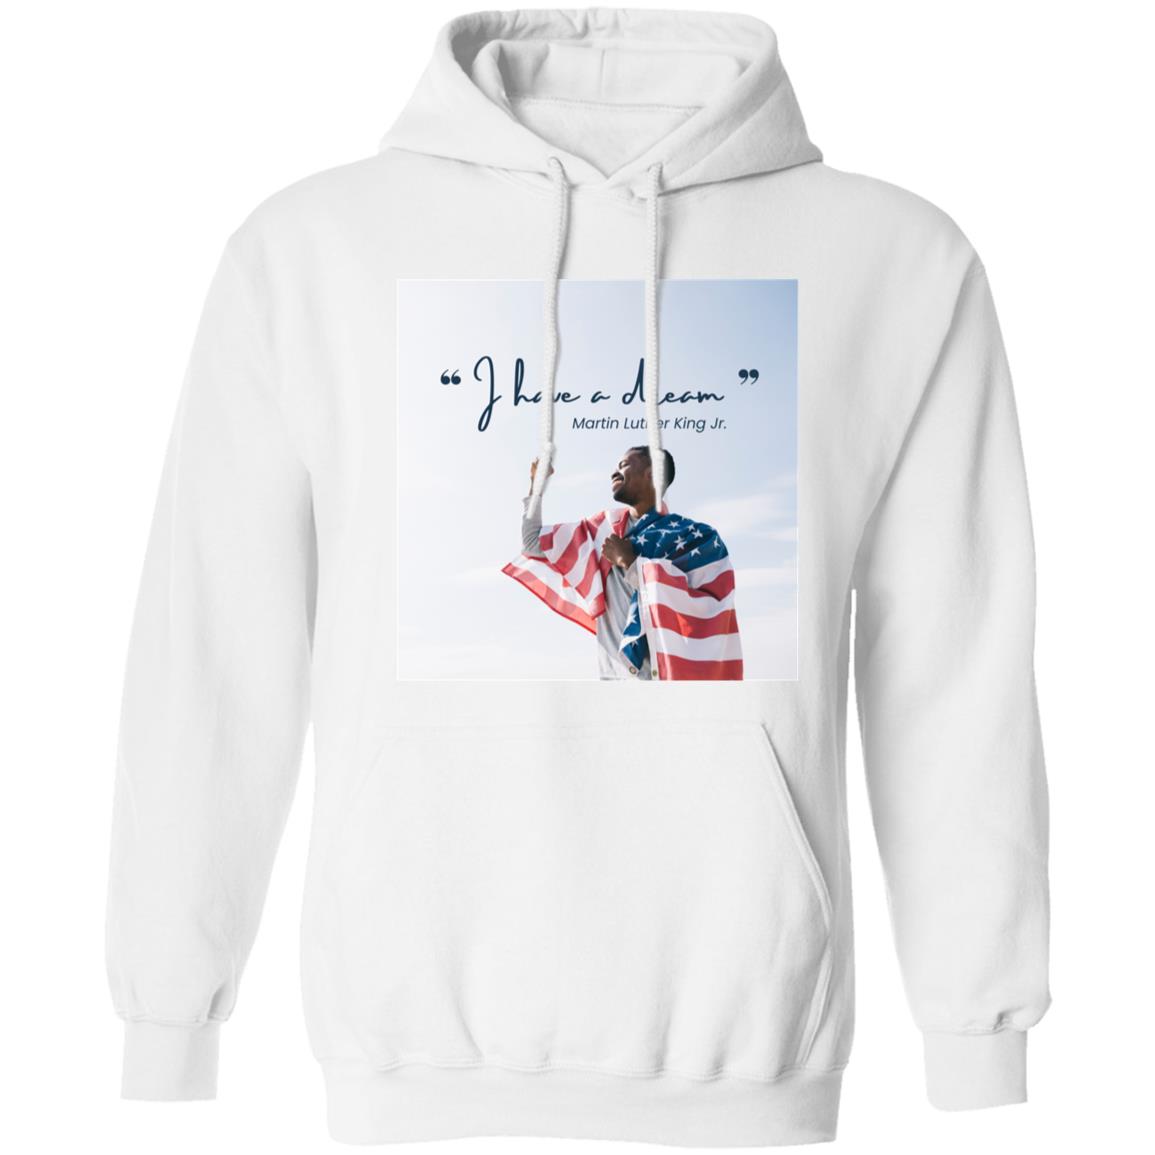 I HAVE A DREAM   Hoodie